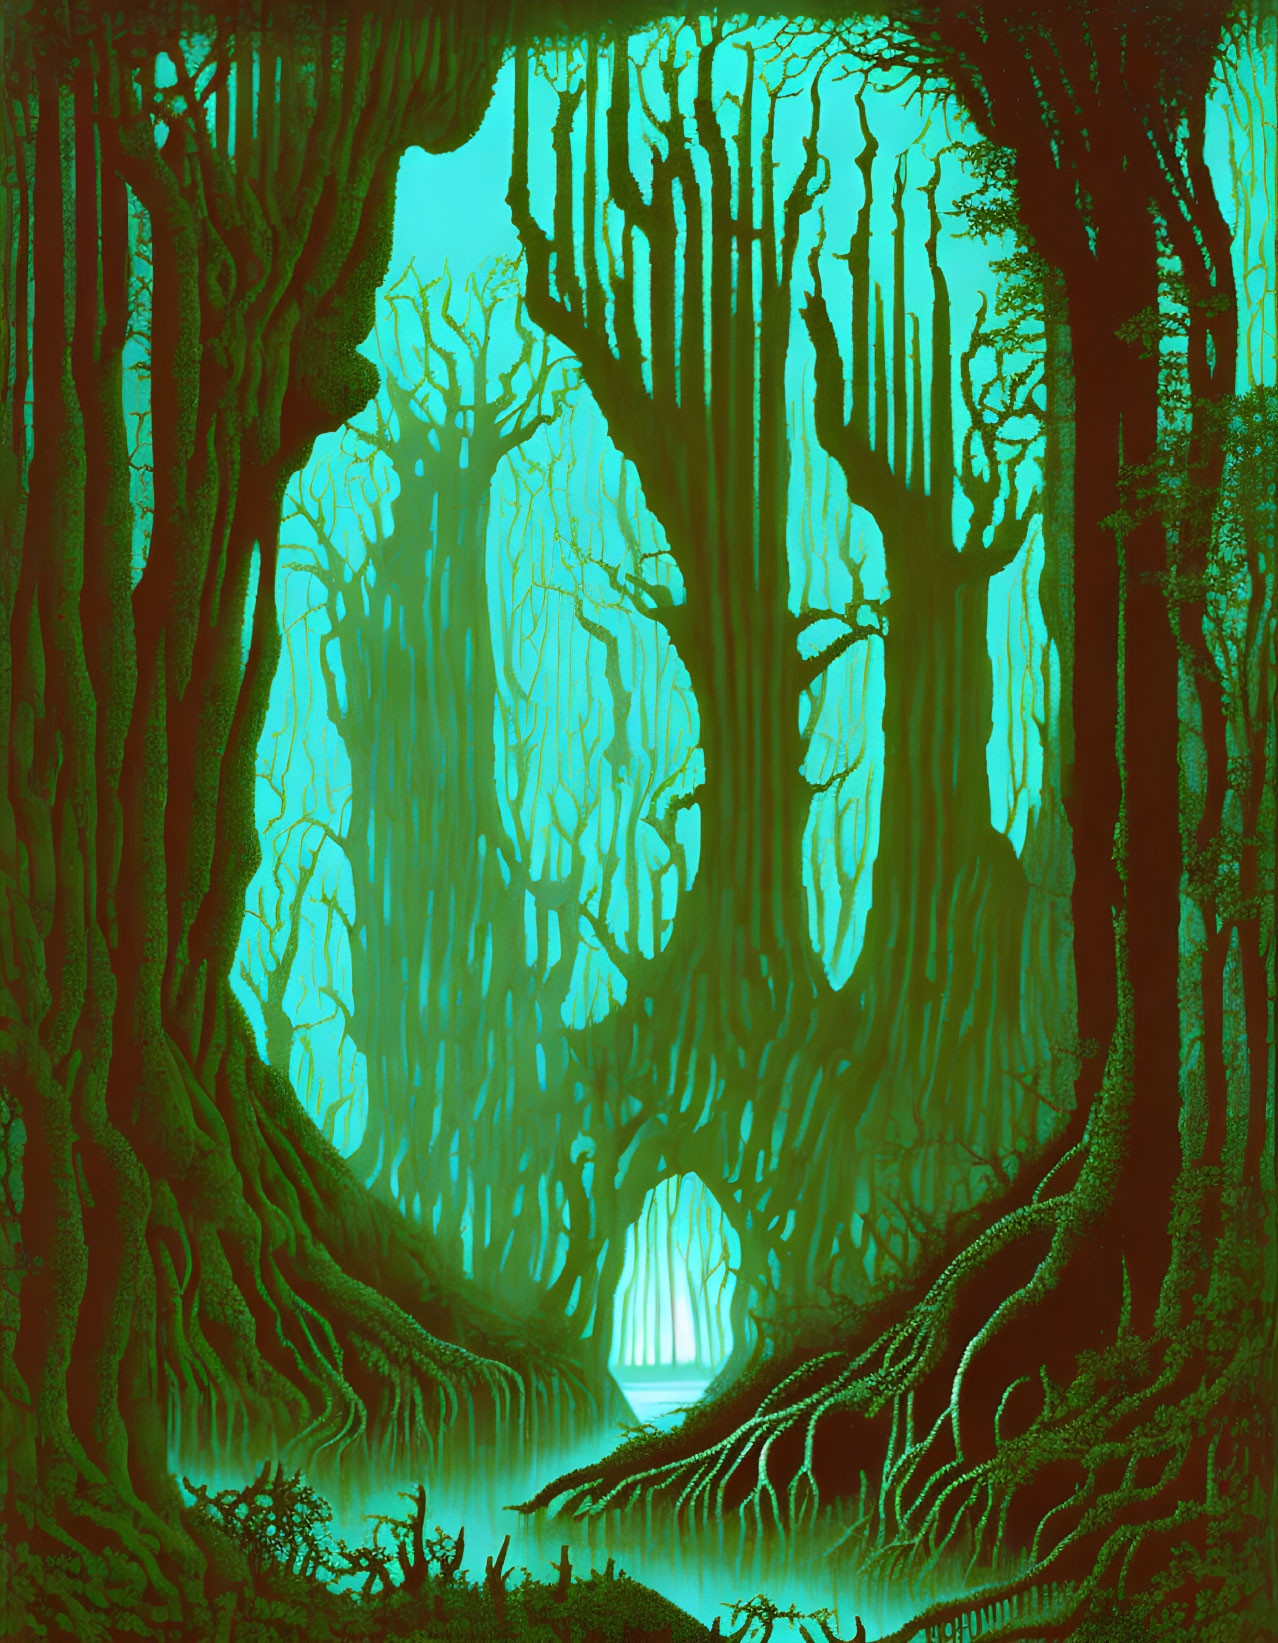 The warlock’s forest 